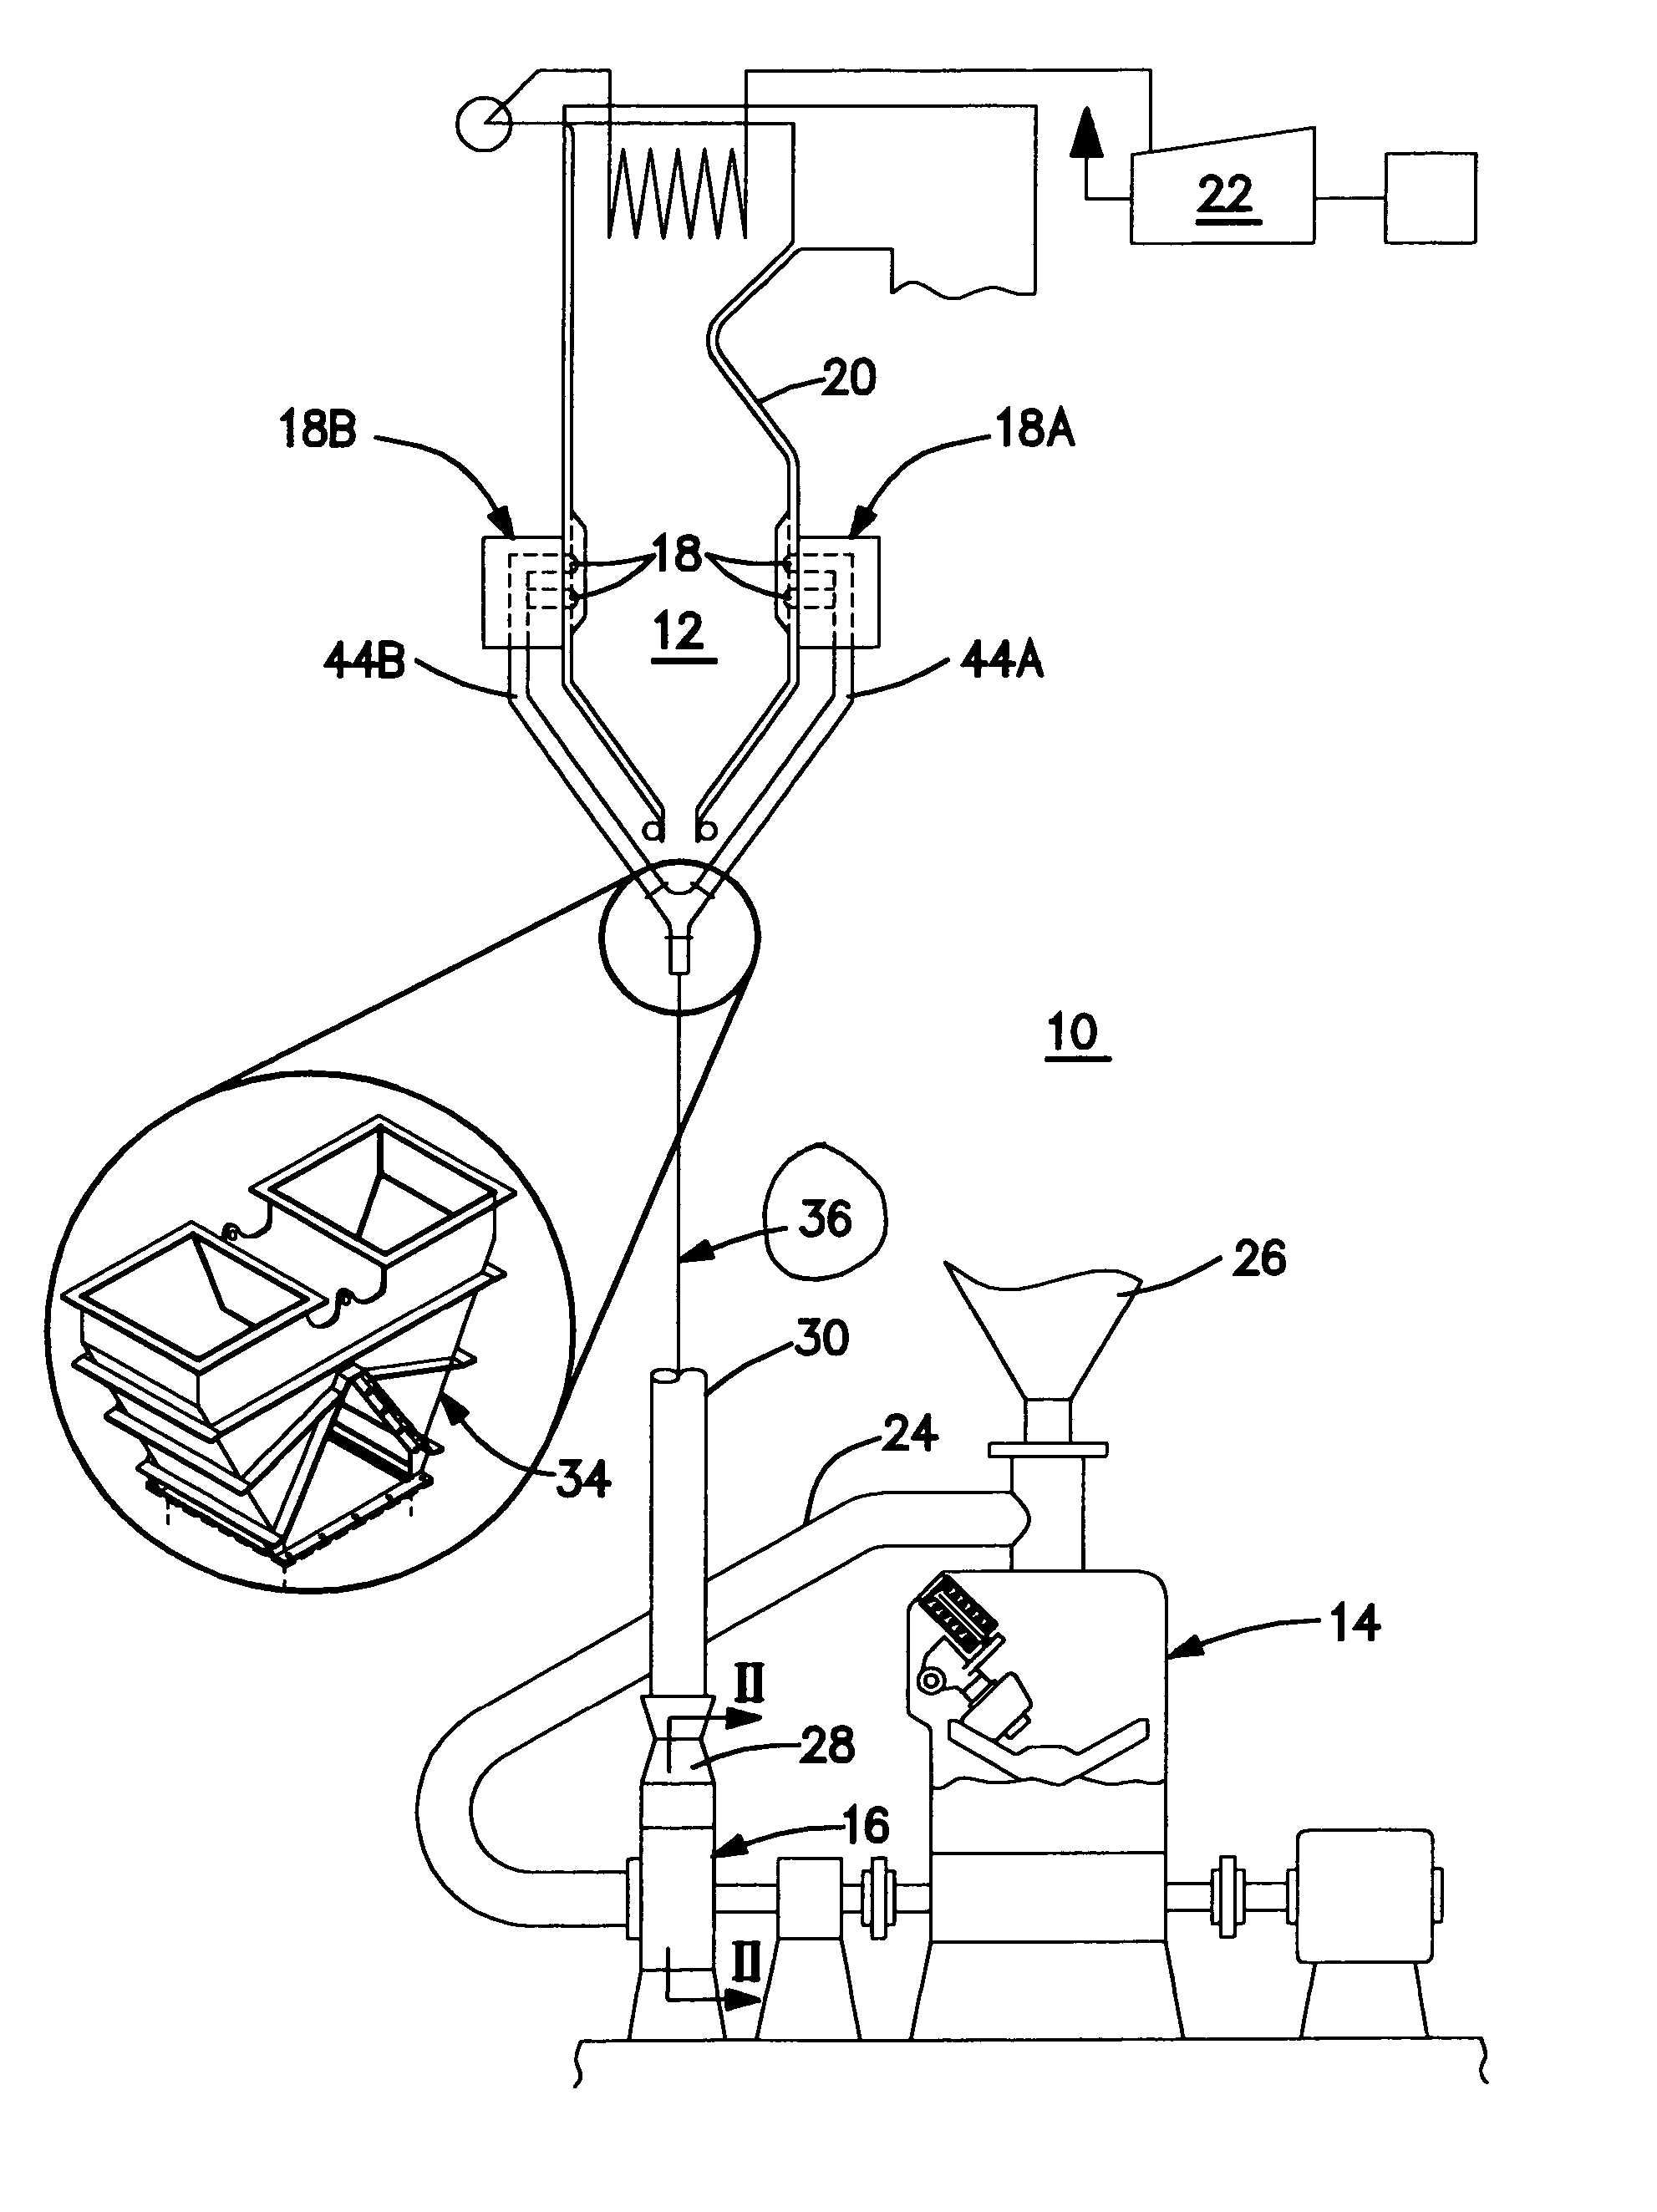 Riffle distributor assembly for a fossil fuel fired combustion arrangement